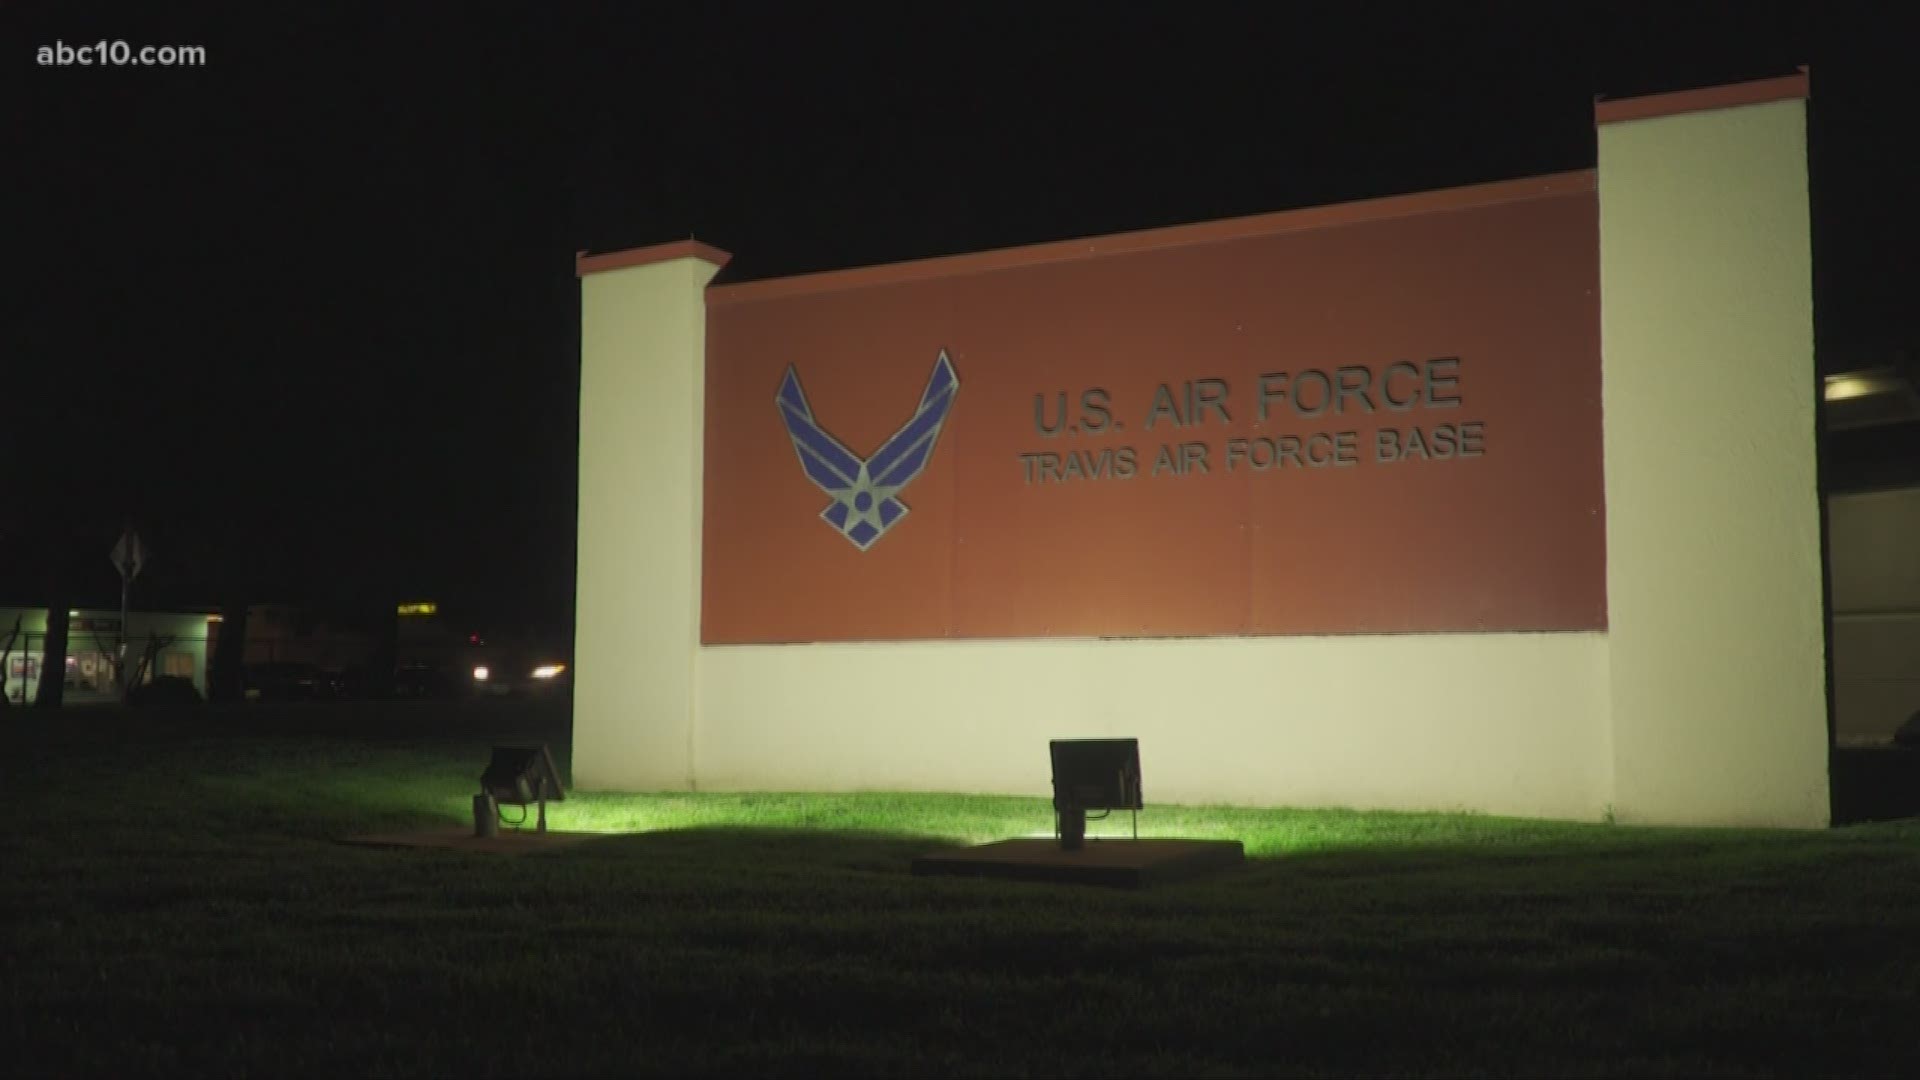 "Travis Air Force Base will only provide housing support, while HHS will be responsible for all care, transportation, and security of the evacuees," officials said.